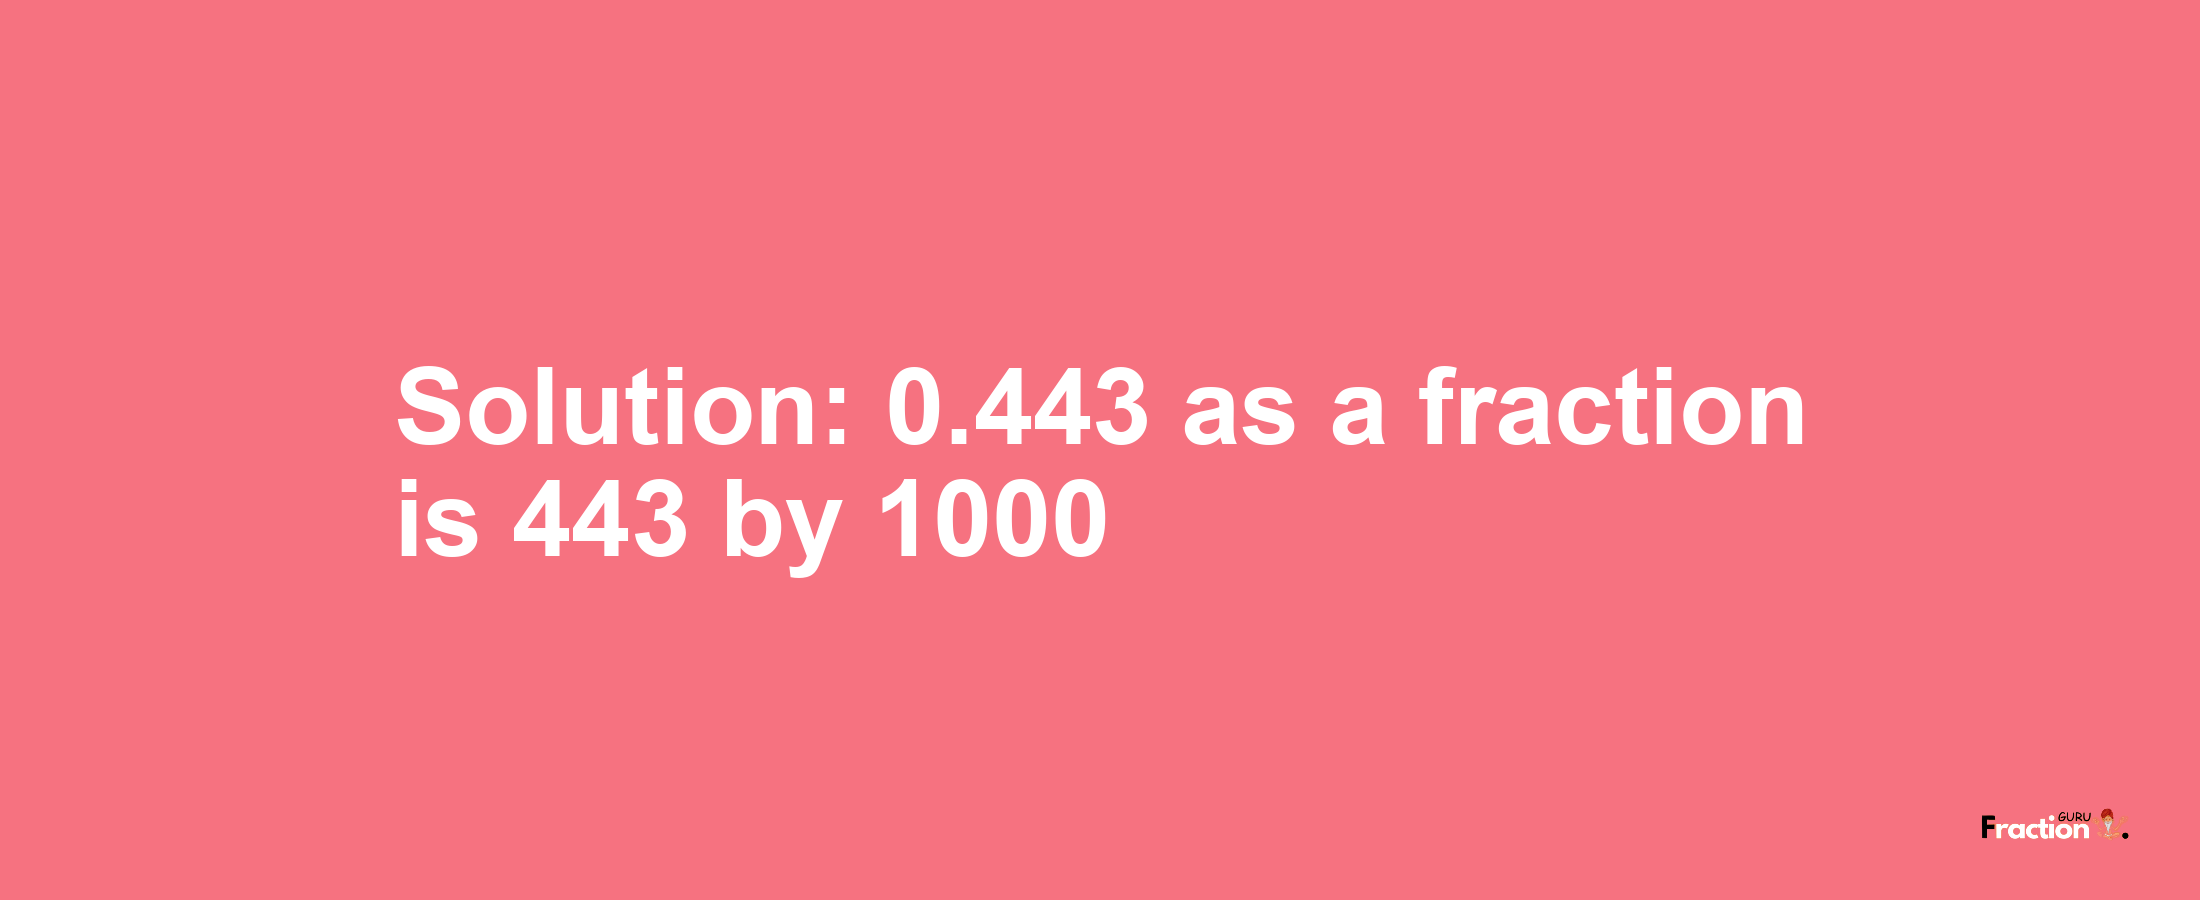 Solution:0.443 as a fraction is 443/1000